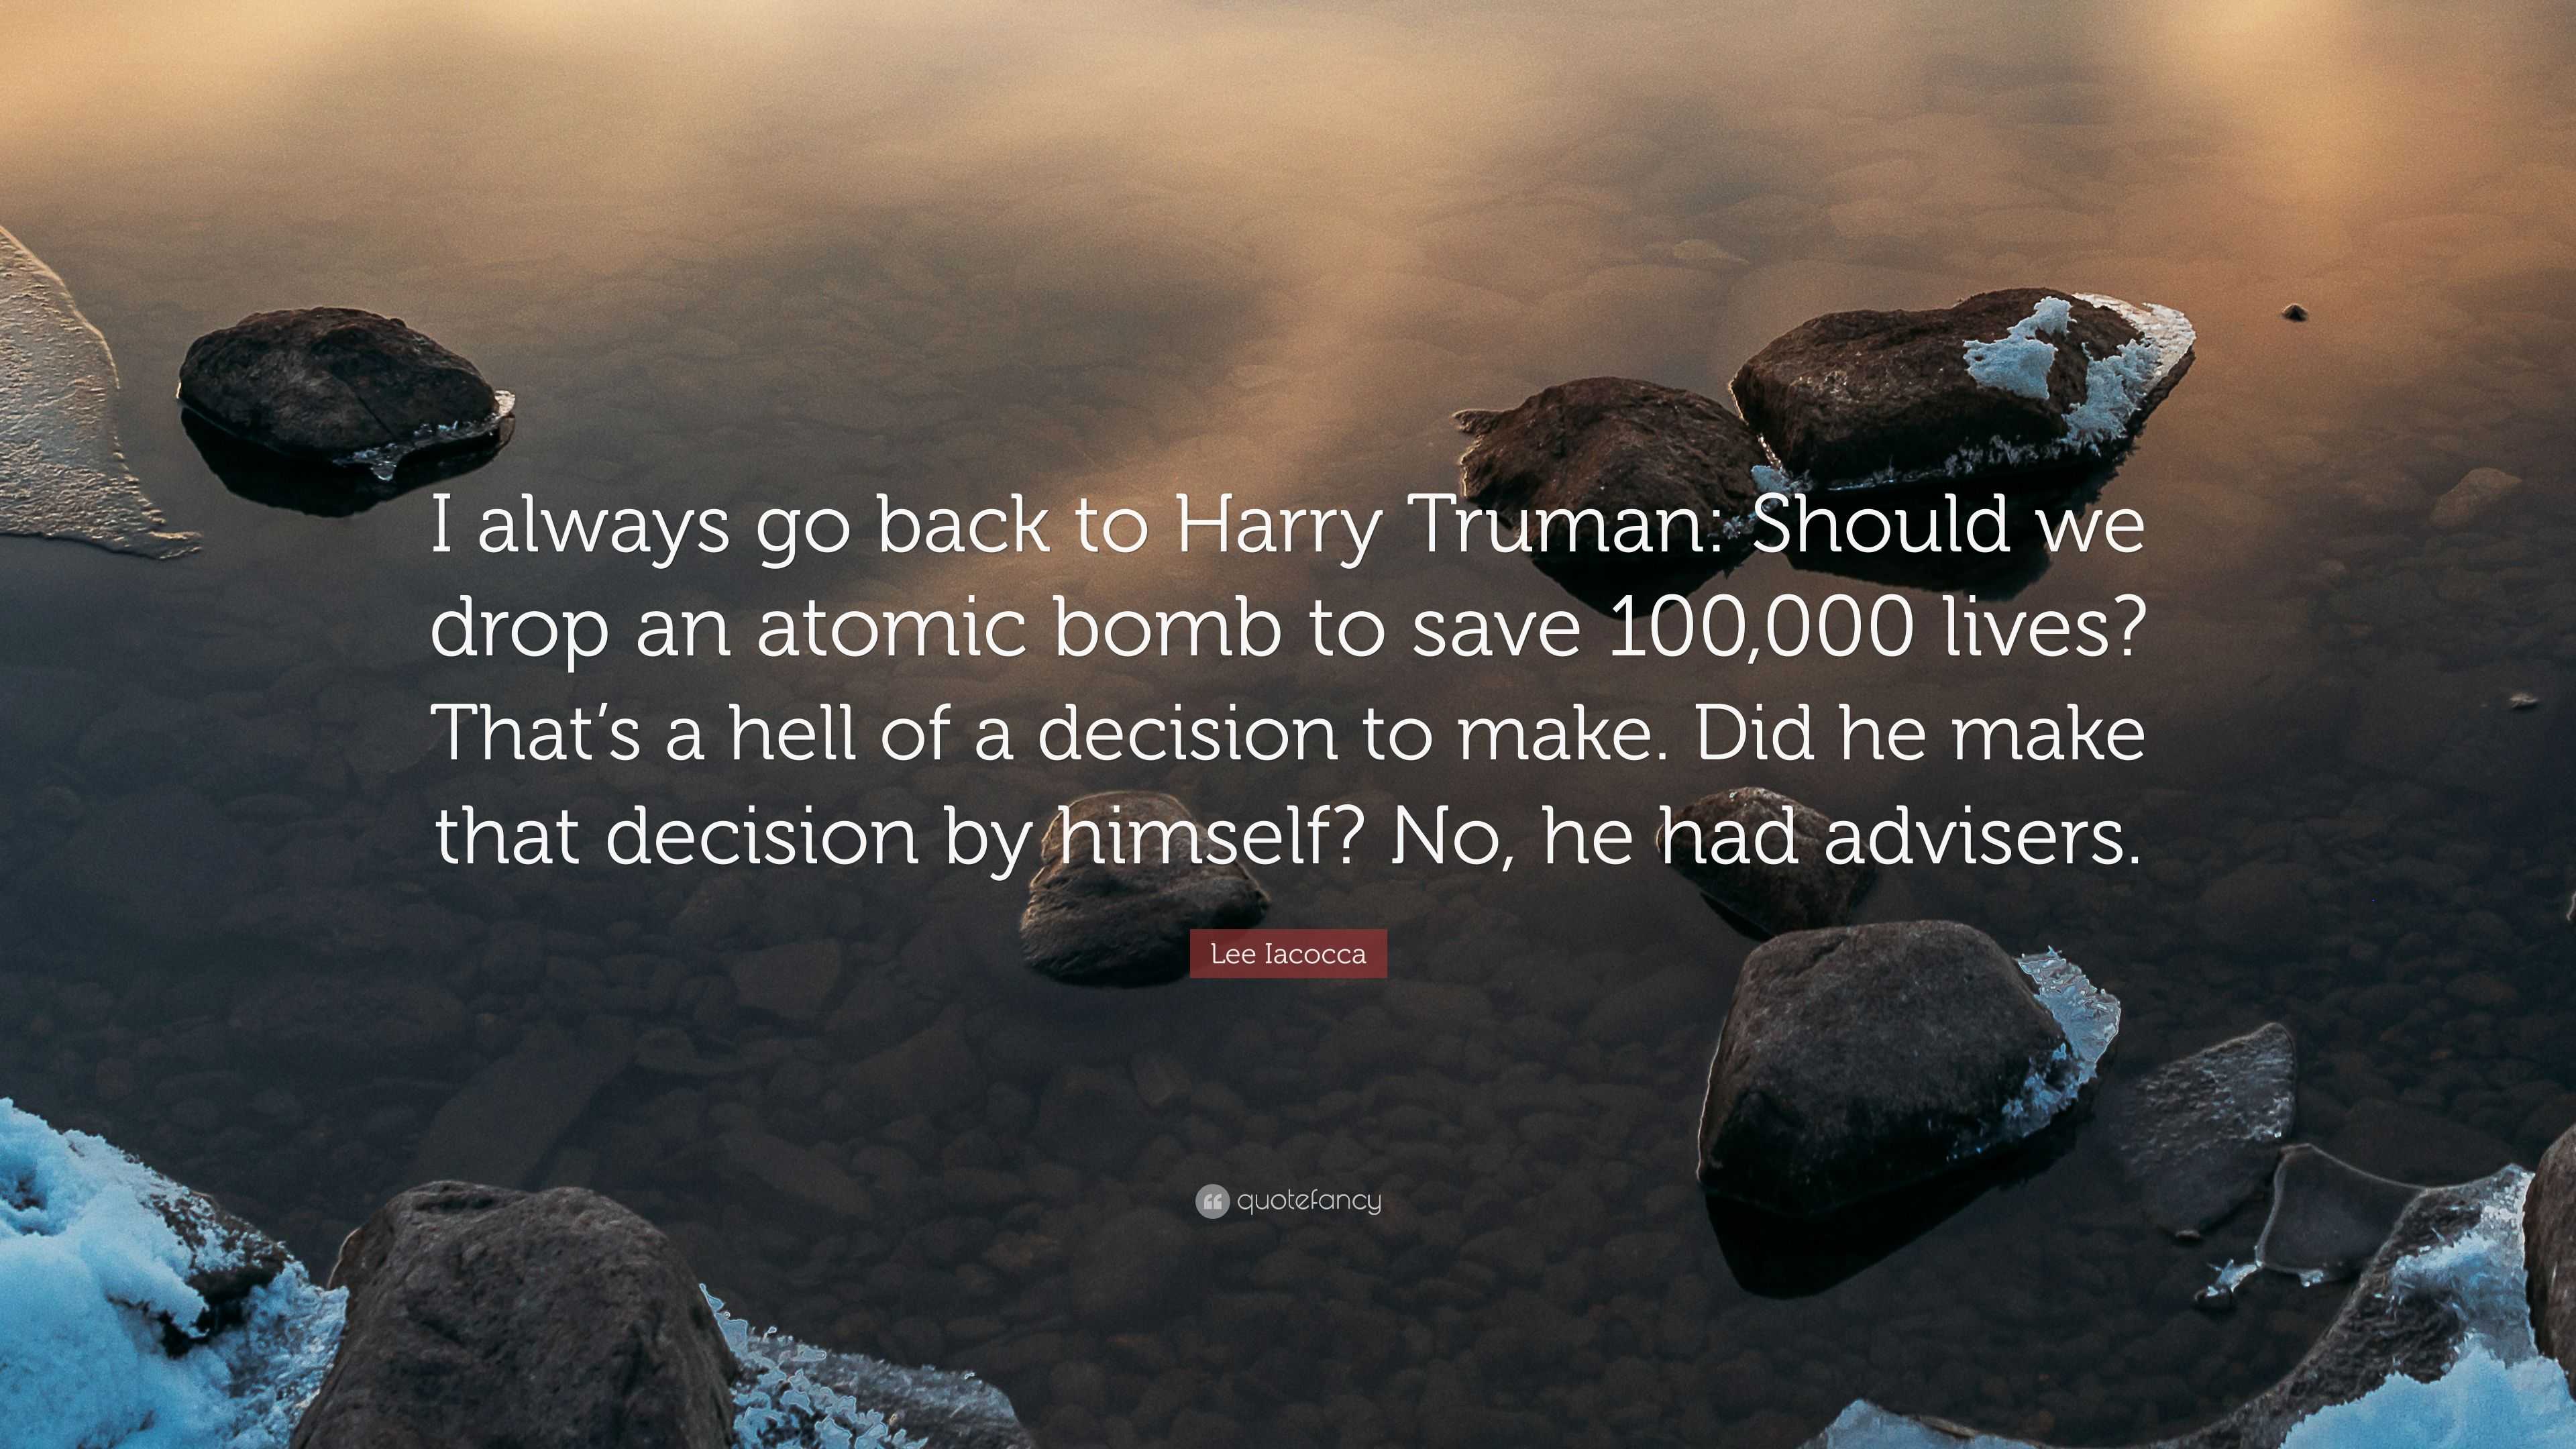 Should Harry S. Truman Have Dropped the Atomic Bomb? Essay Sample